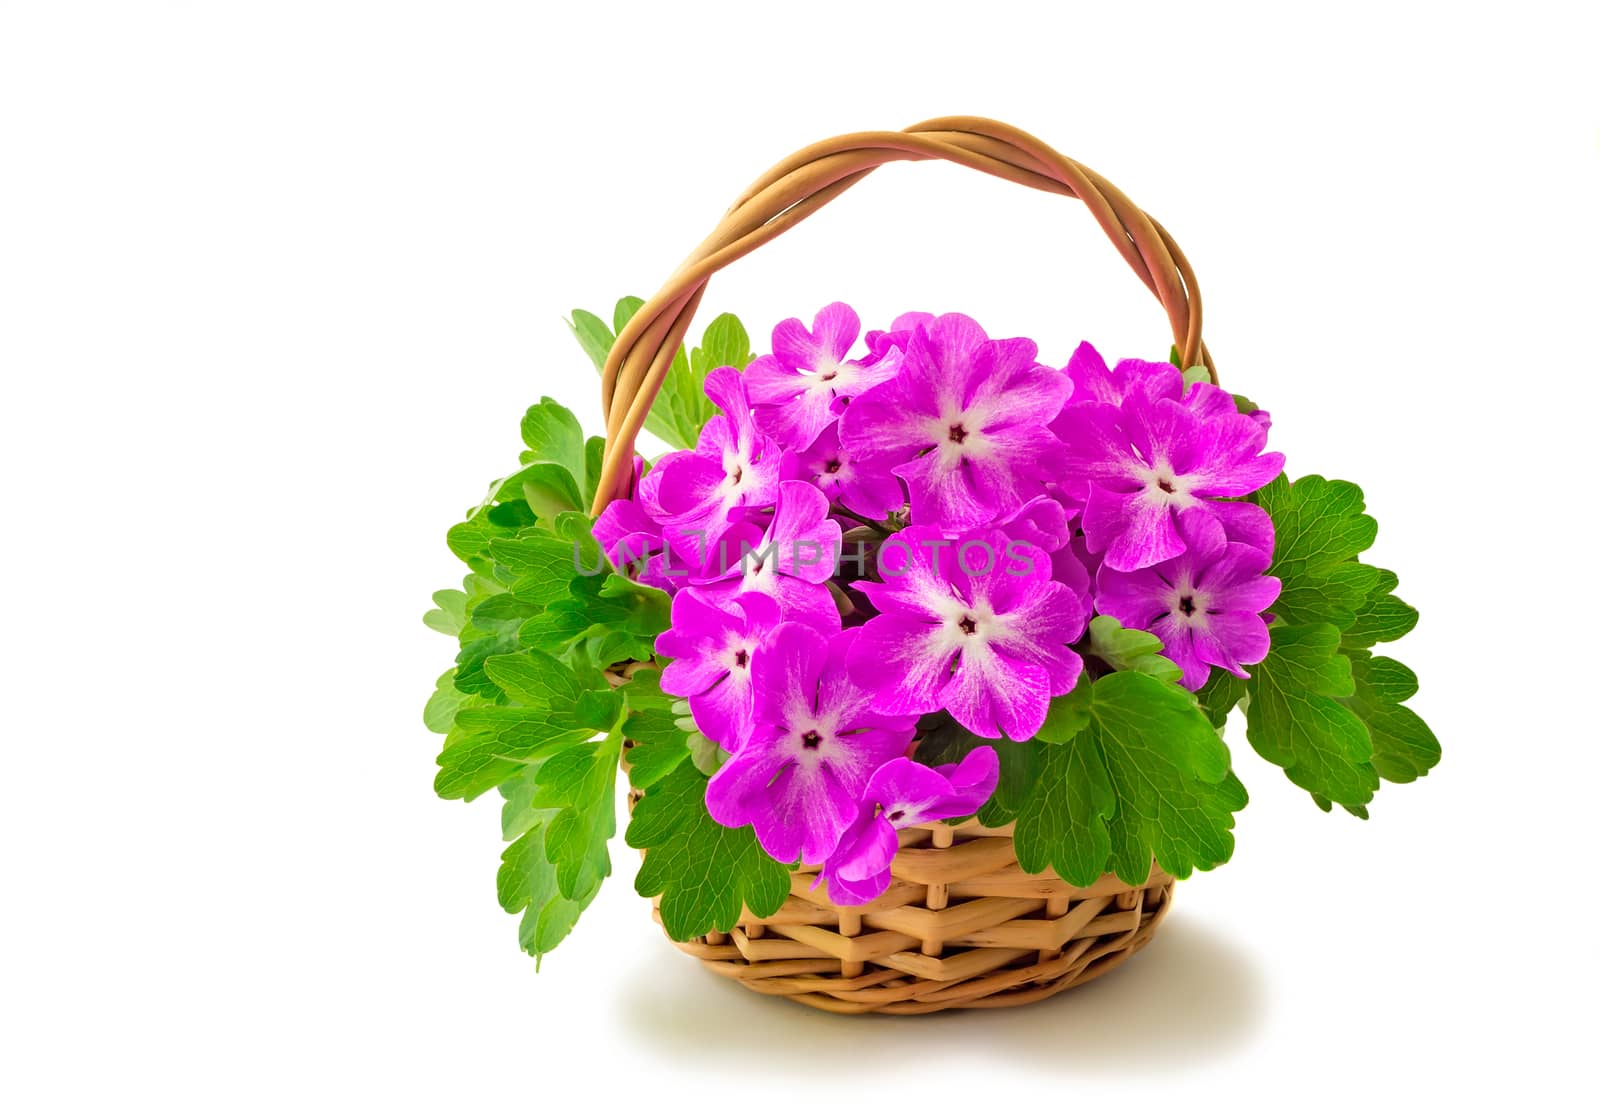  Basket with large bright flowers of a violet on a white background.